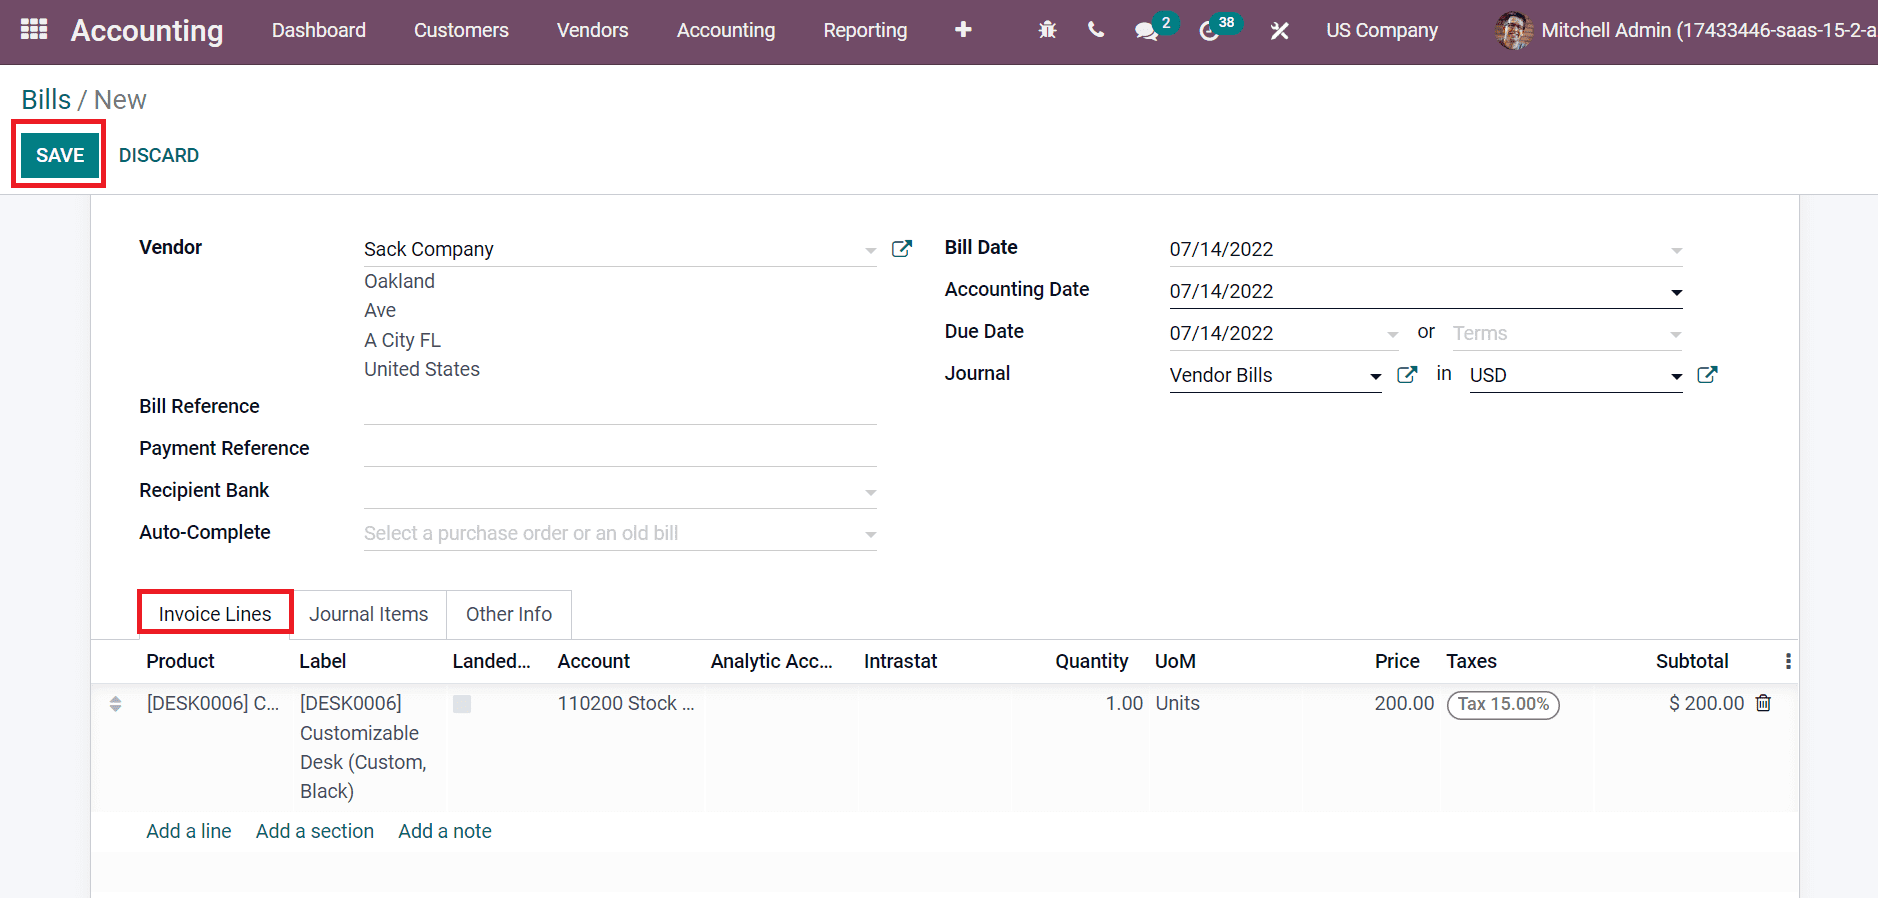 how-to-setup-payable-receivable-accounts-in-odoo-15-cybrosys